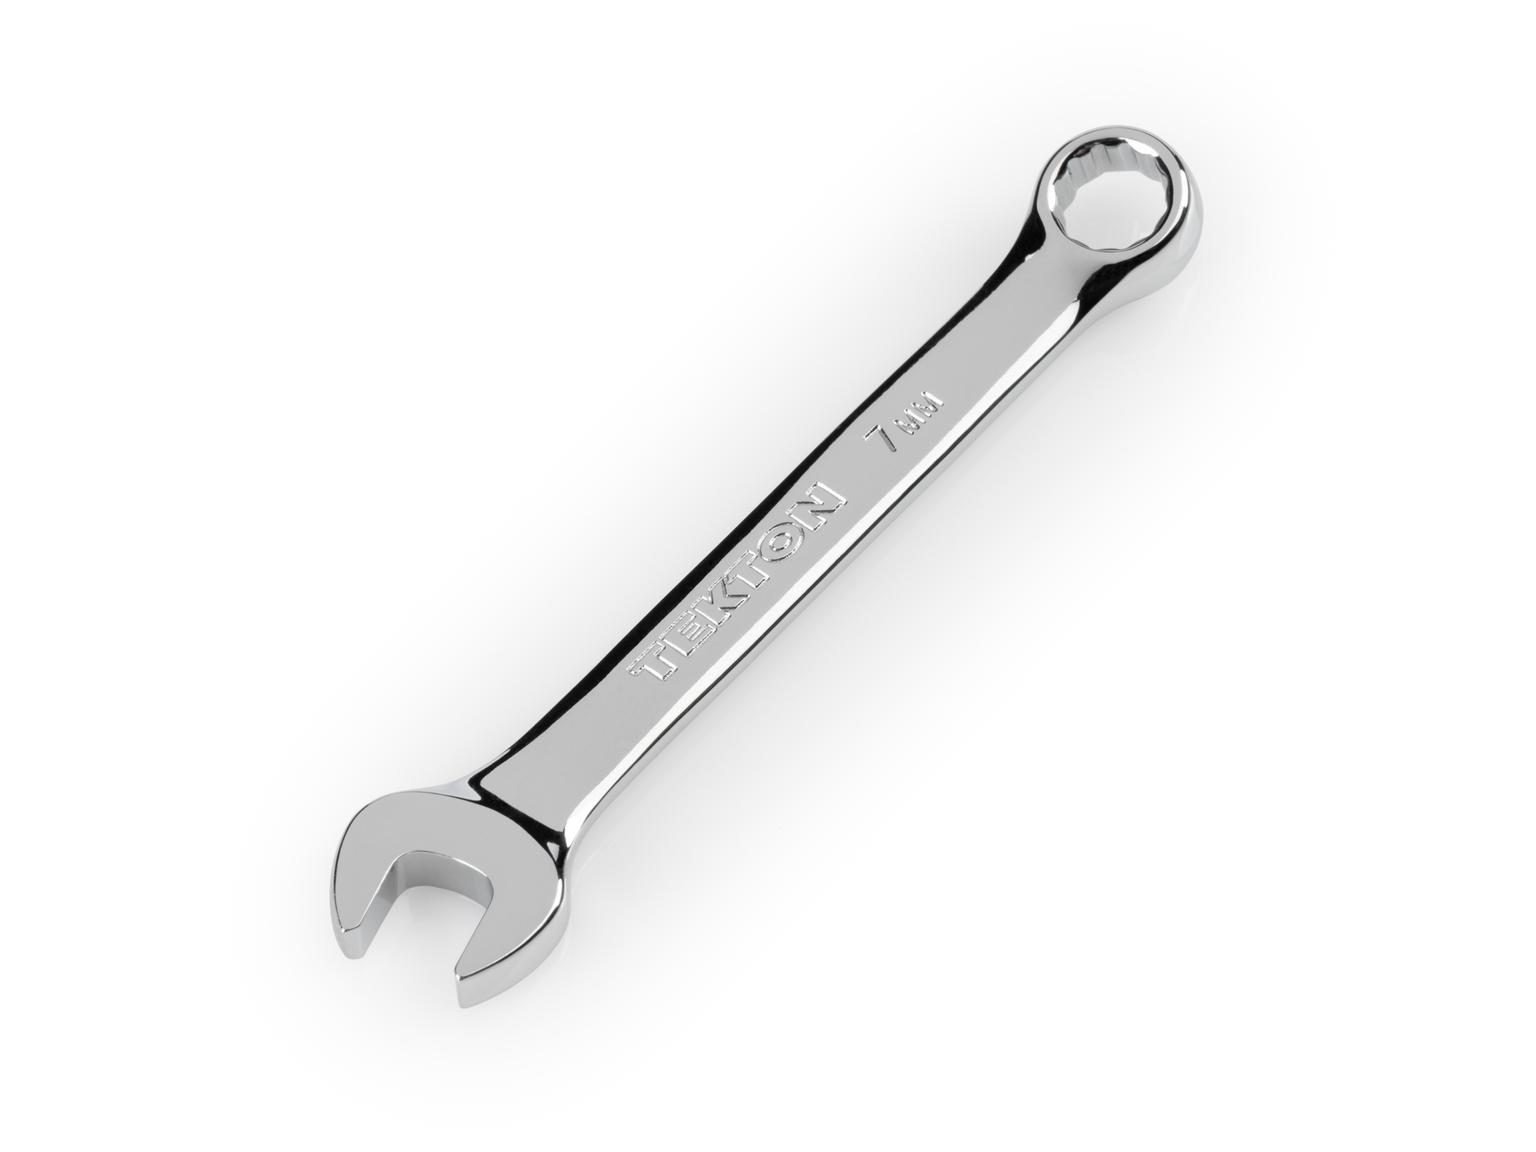 TEKTON 18062-T 7 mm Stubby Combination Wrench